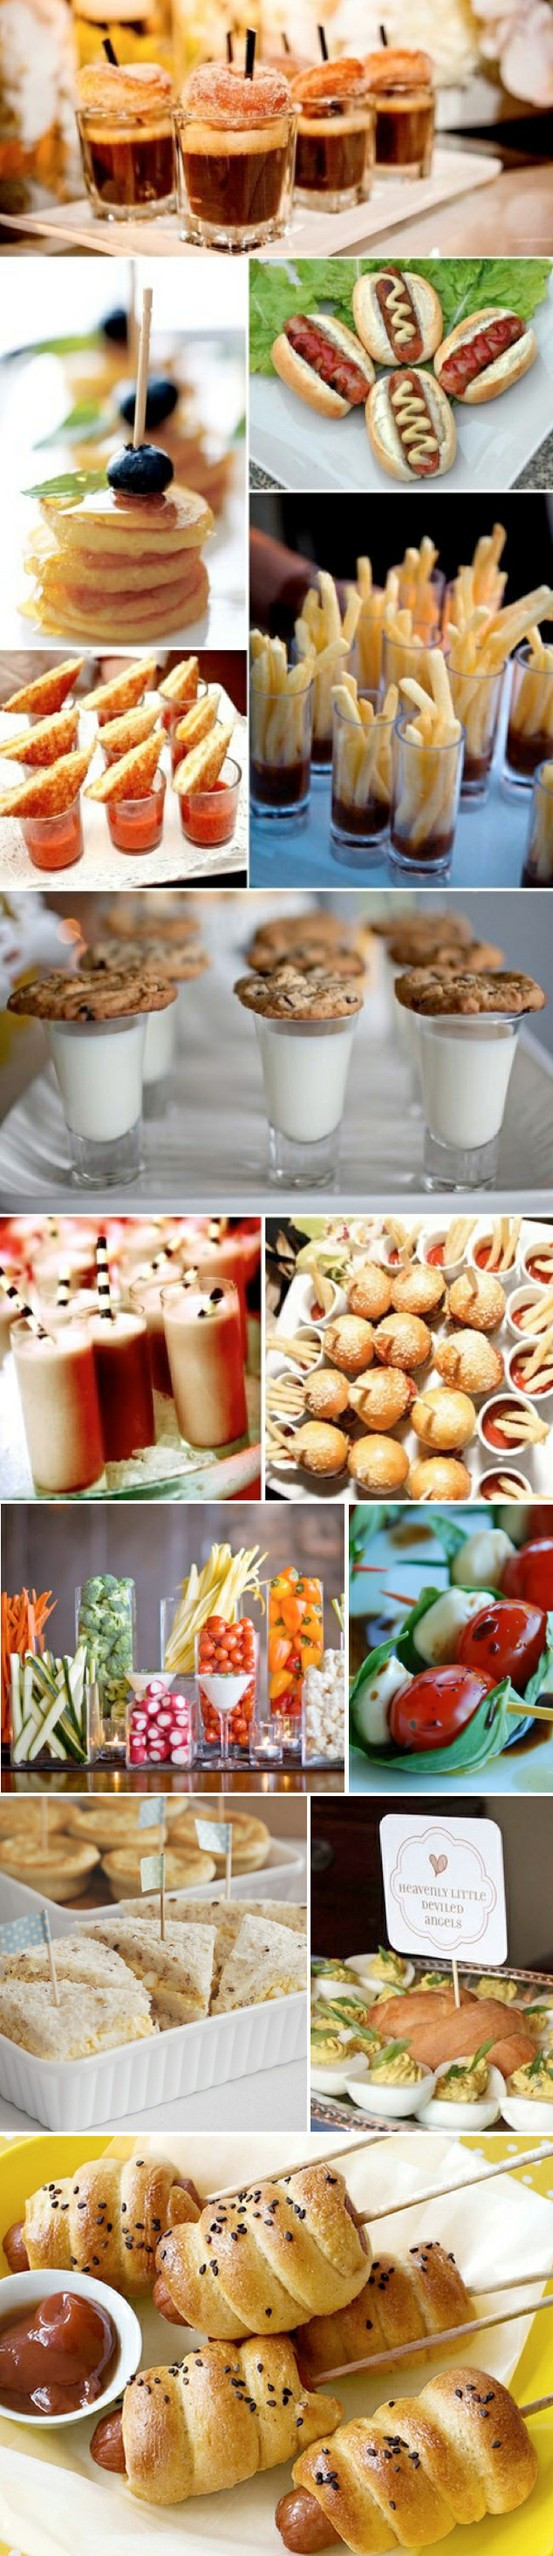 Party Food Ideas Buffet Finger Foods
 Finger foods for that party you’ve been planning 38